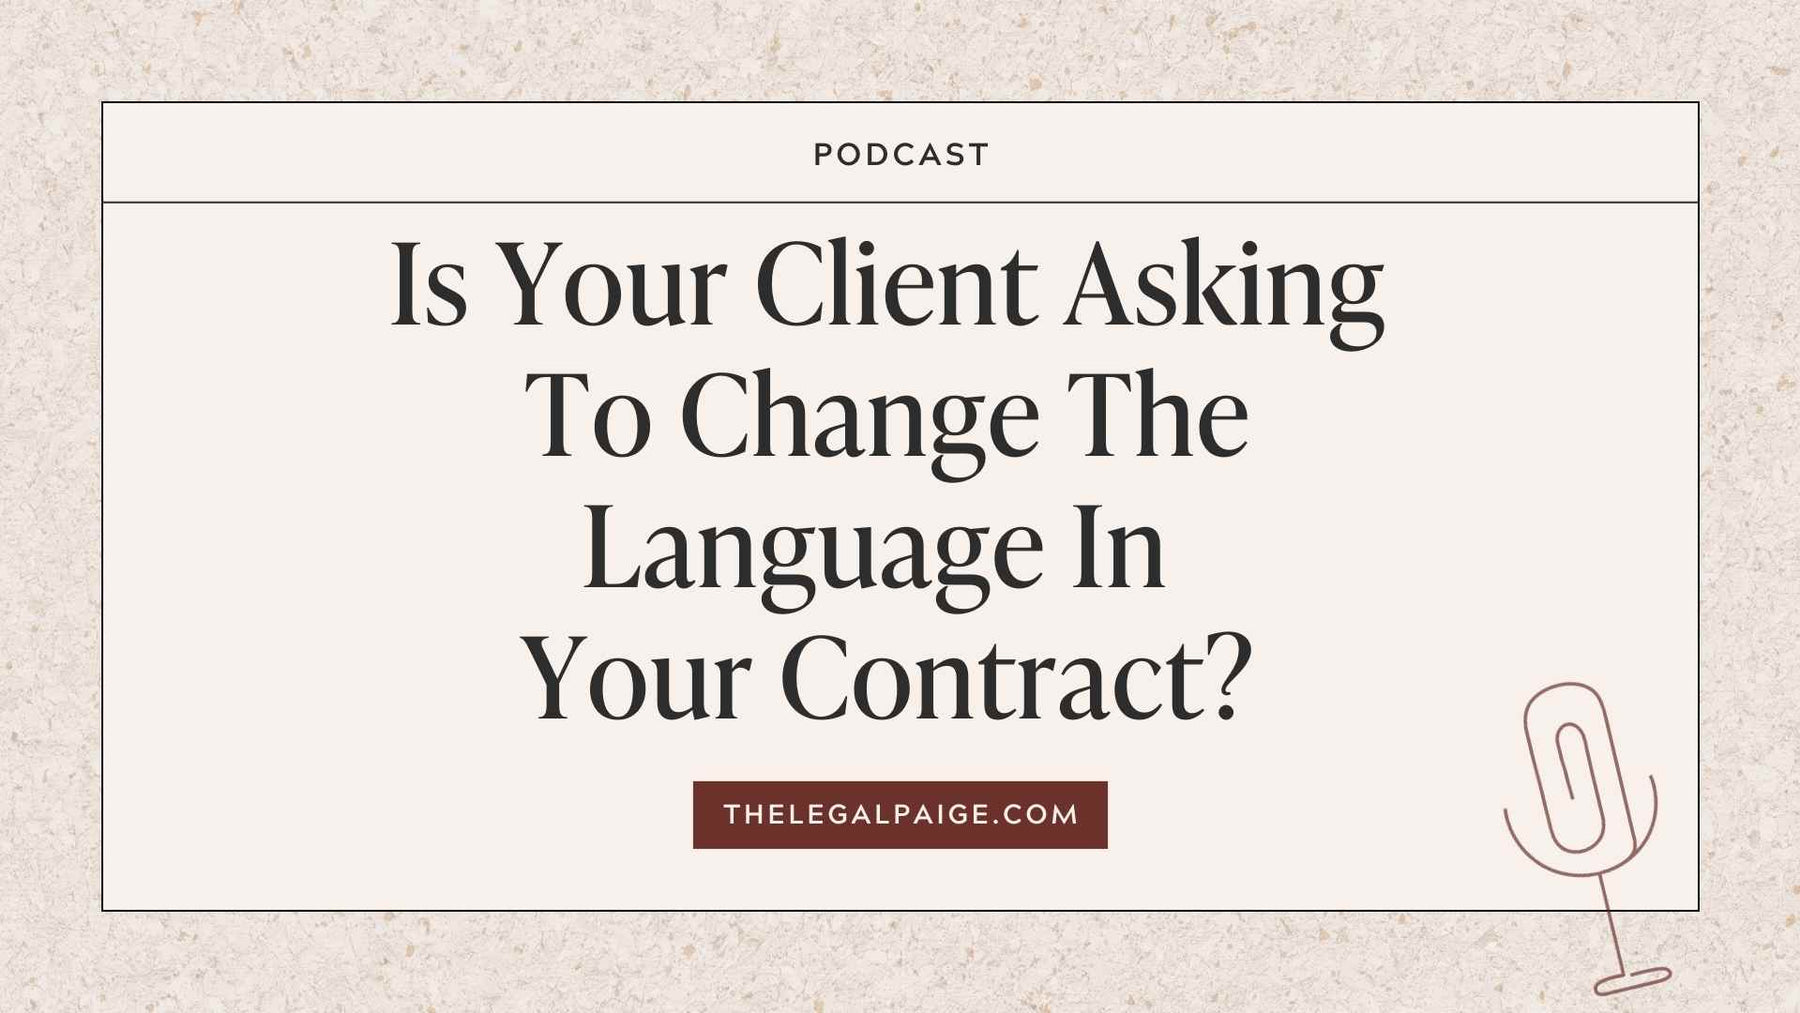 Is Your Client Asking To Change The Language In Your Contract